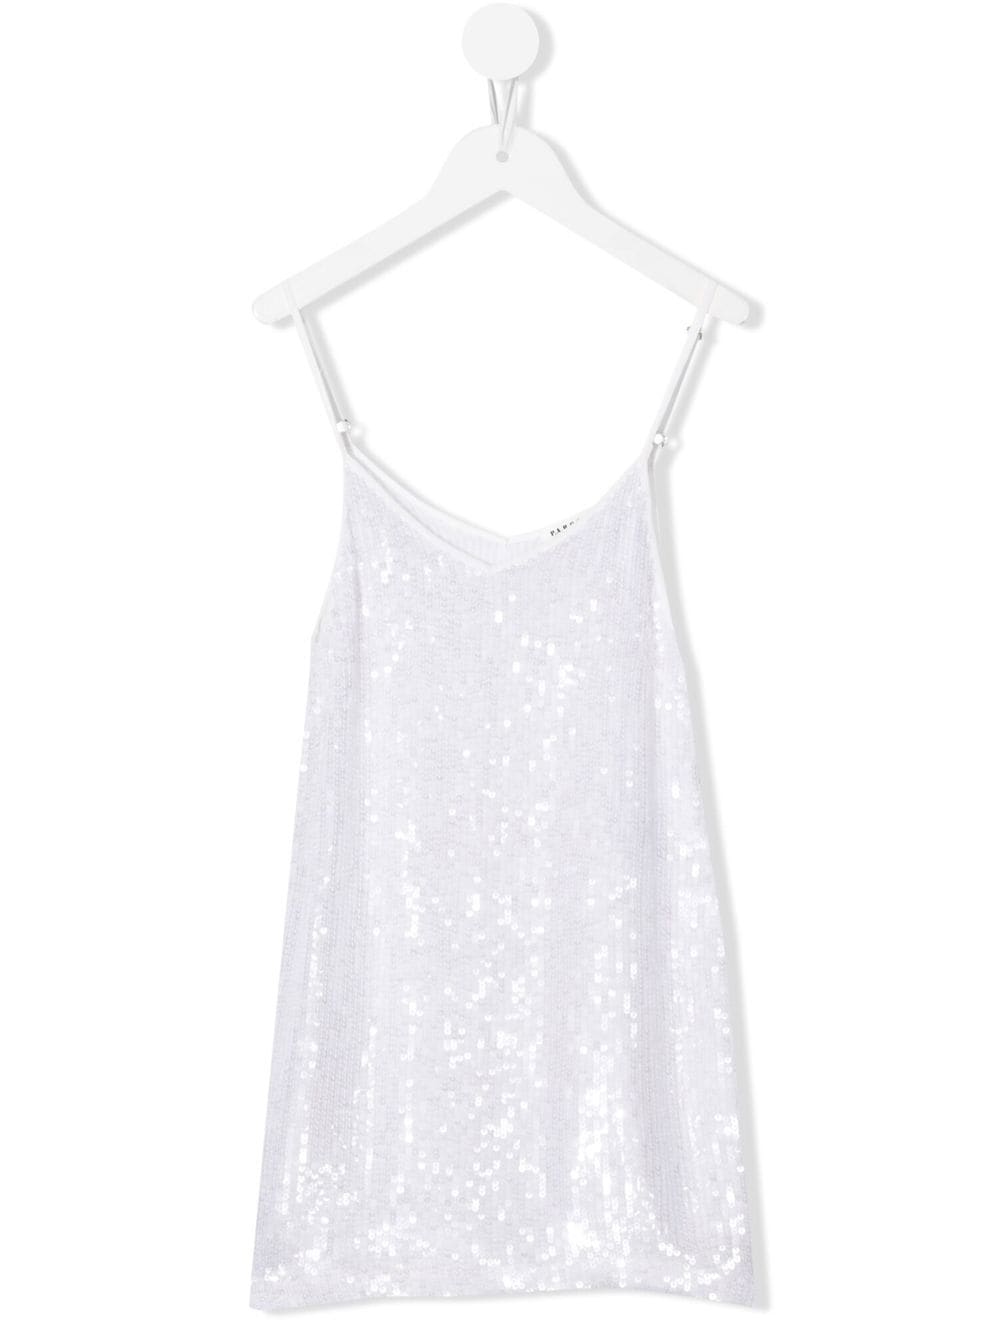 P.A.R.O.S.H. sequin-embellished sleeveless dress - White von P.A.R.O.S.H.